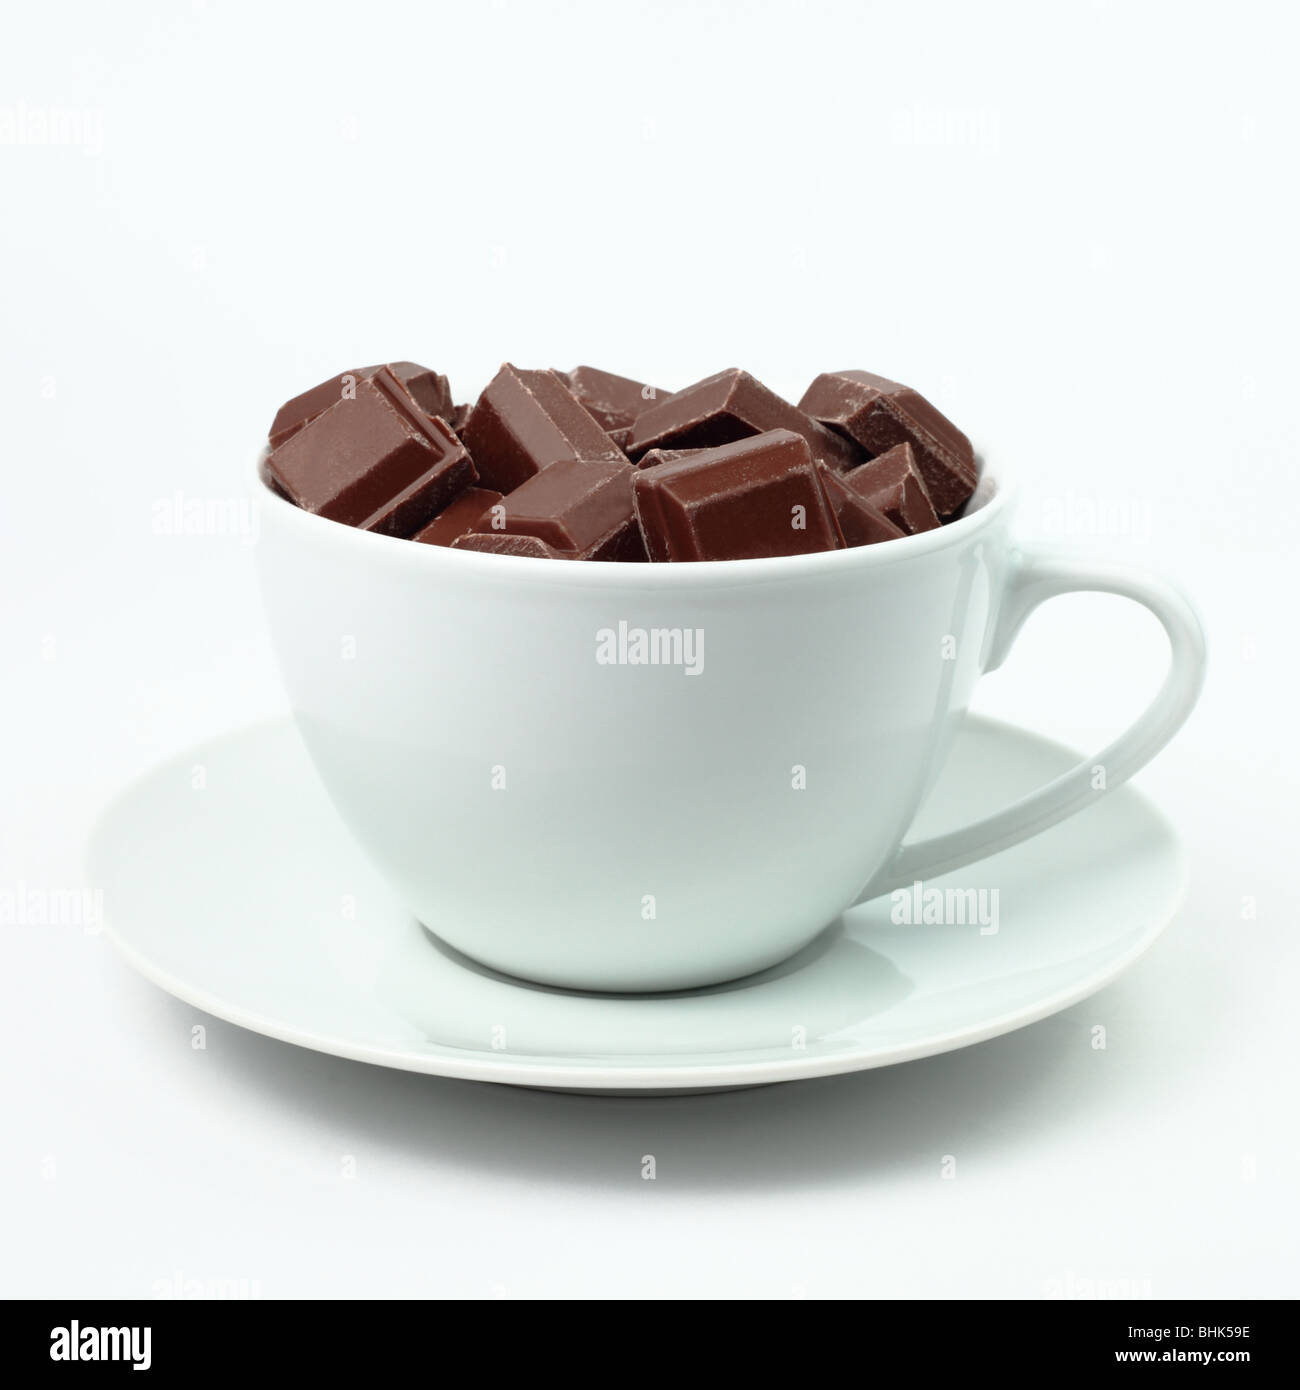 Cup full of milk chocolate pieces on a white background in a square format Stock Photo